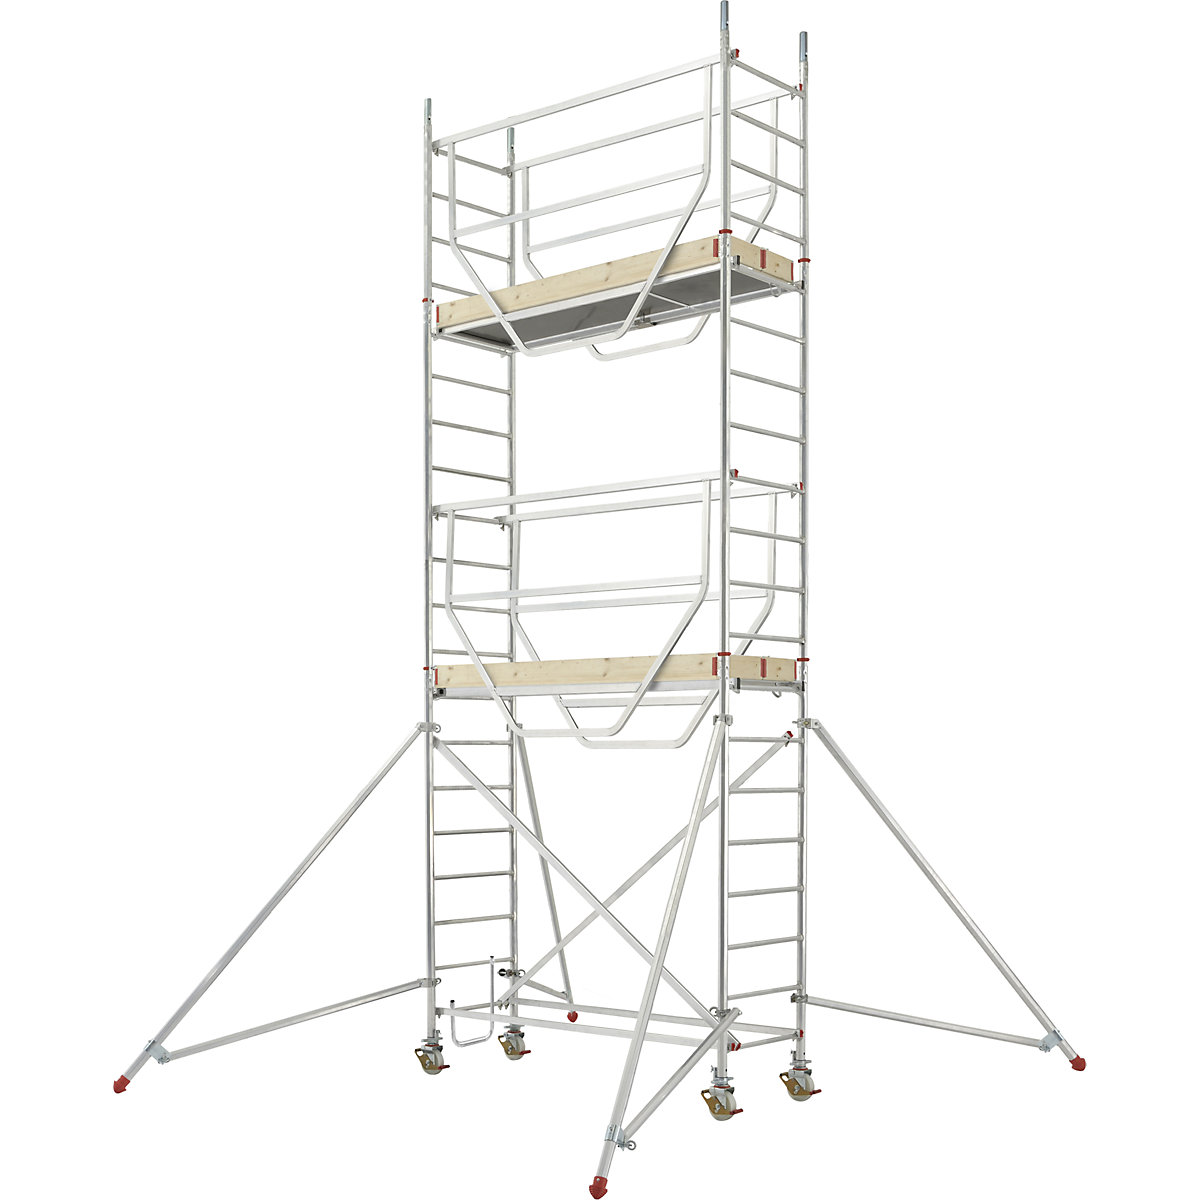 ADVANCED SAFE-T 7075 mobile access tower – HYMER, welded, platform 2.08 x 0.61 m, max. working height 6.25 m-14